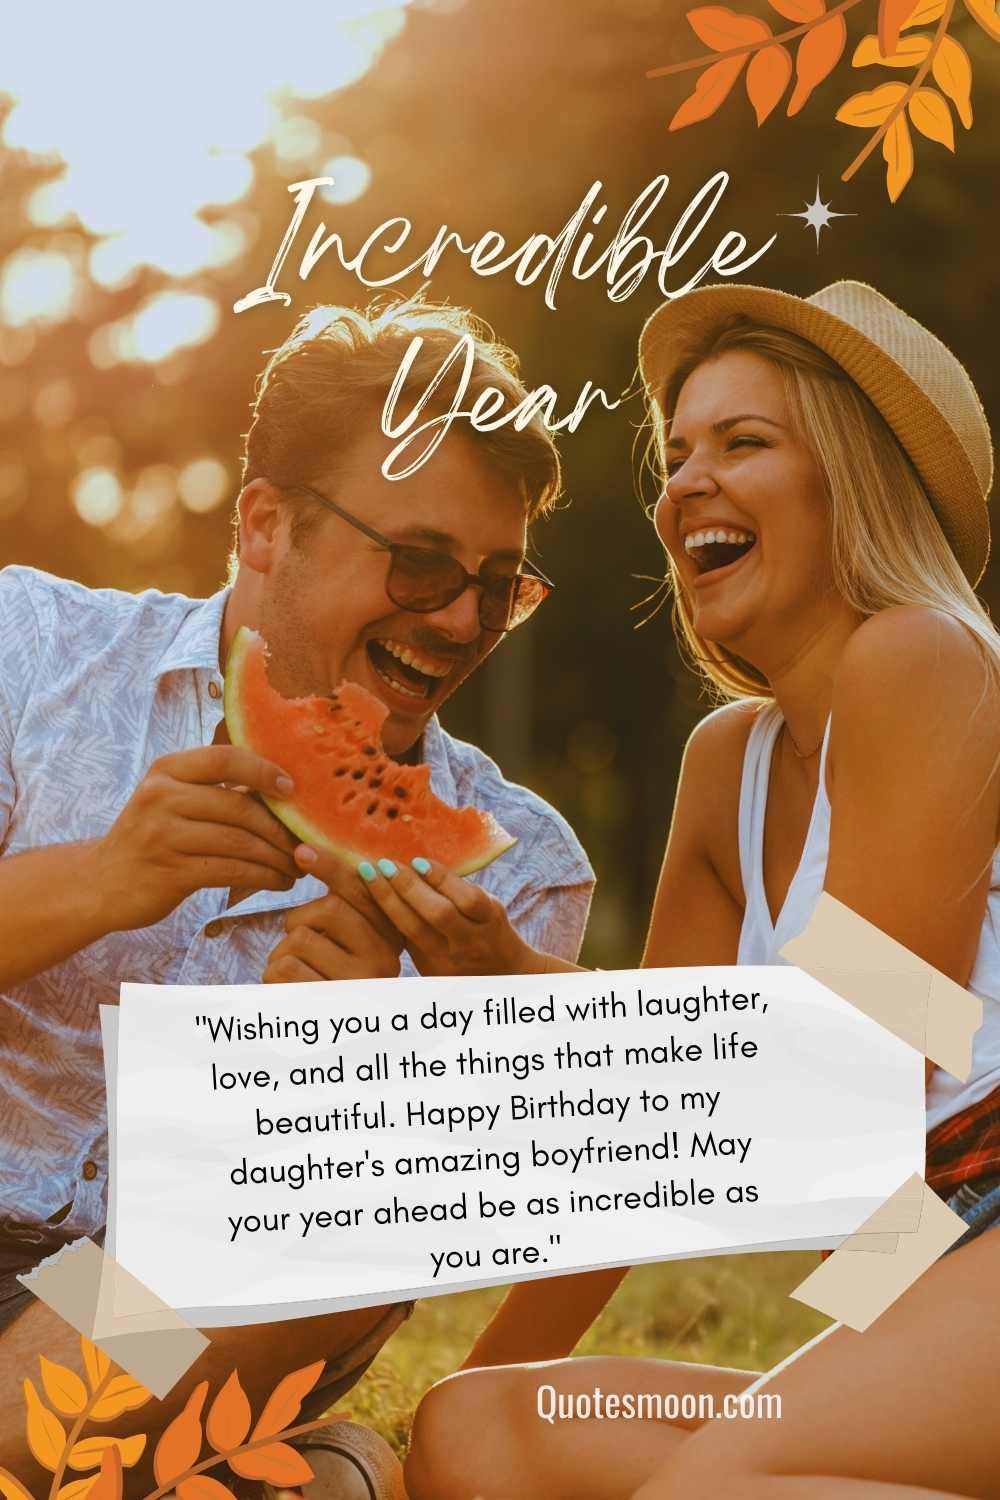 Happy Birthday Wishes For Daughter’s Boyfriend With Quotes